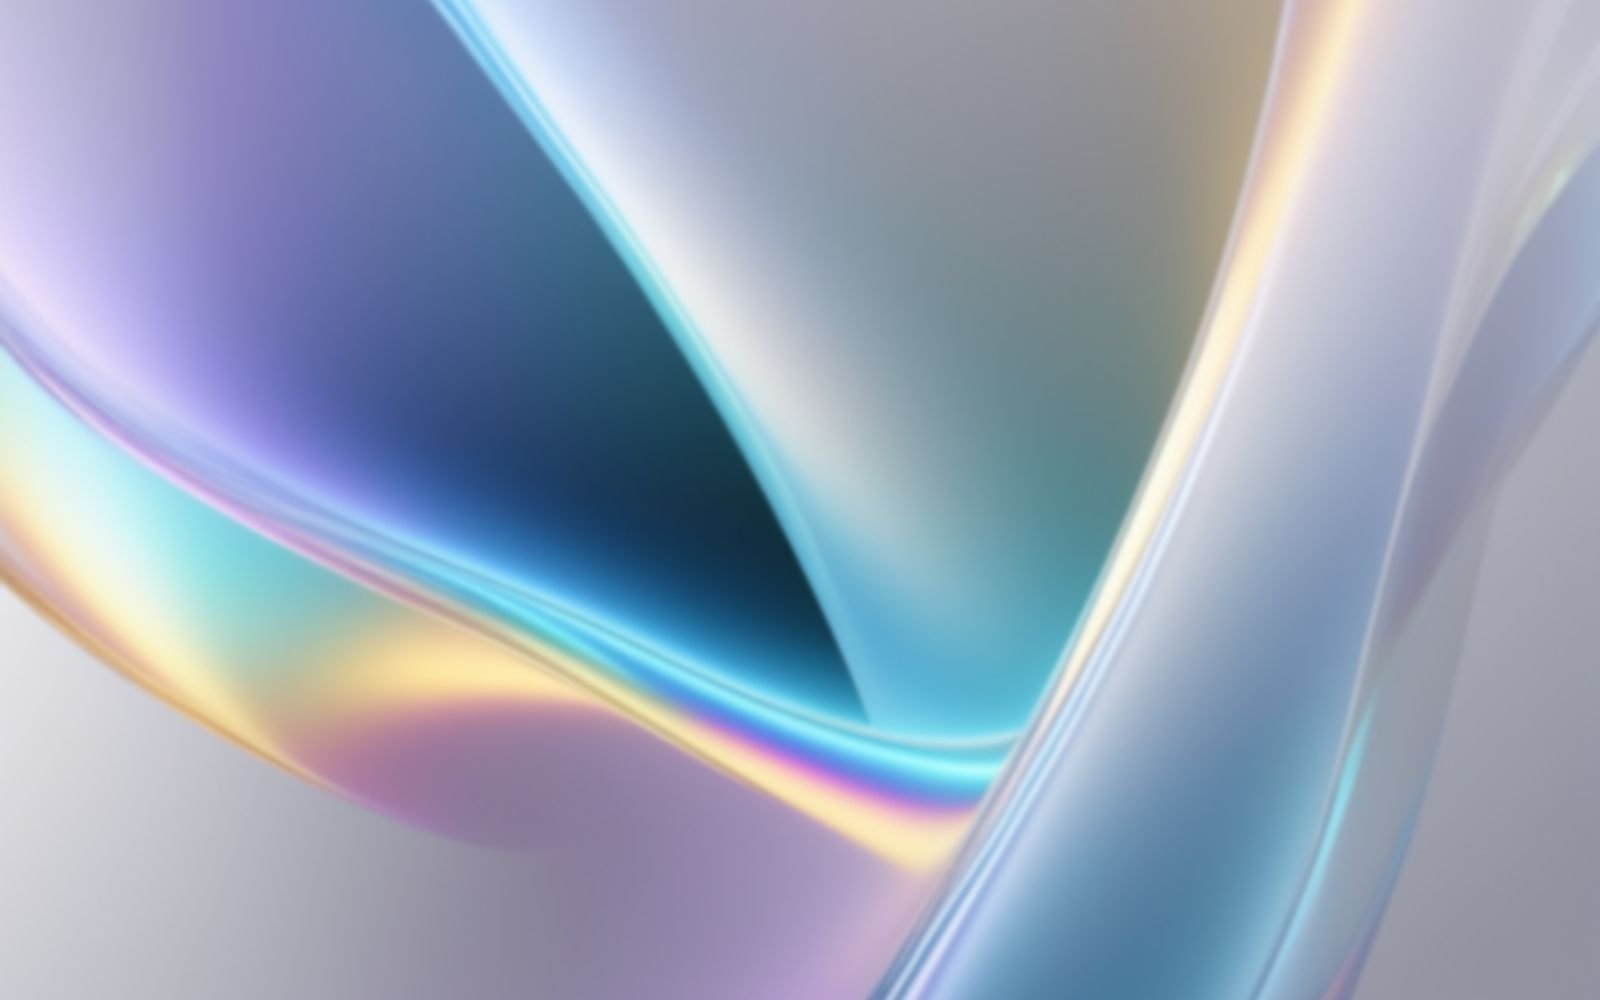 Premium Quality Abstract Hologram Wallpaper background